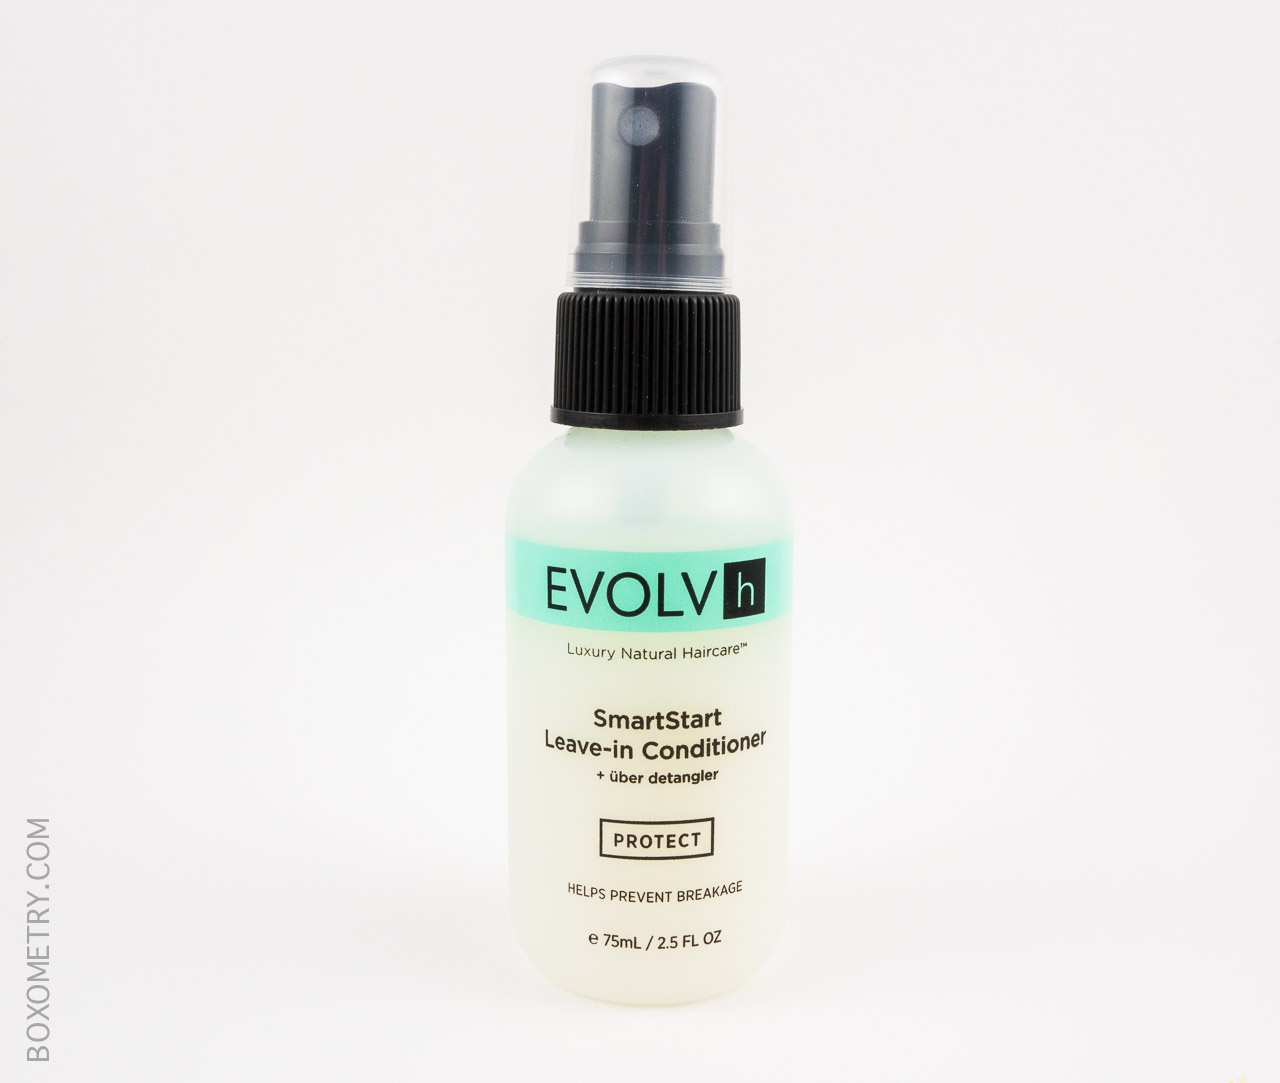 Petit Vour January 2015 Subscription Box EVOLVh SmartStart Leave-in Conditioner